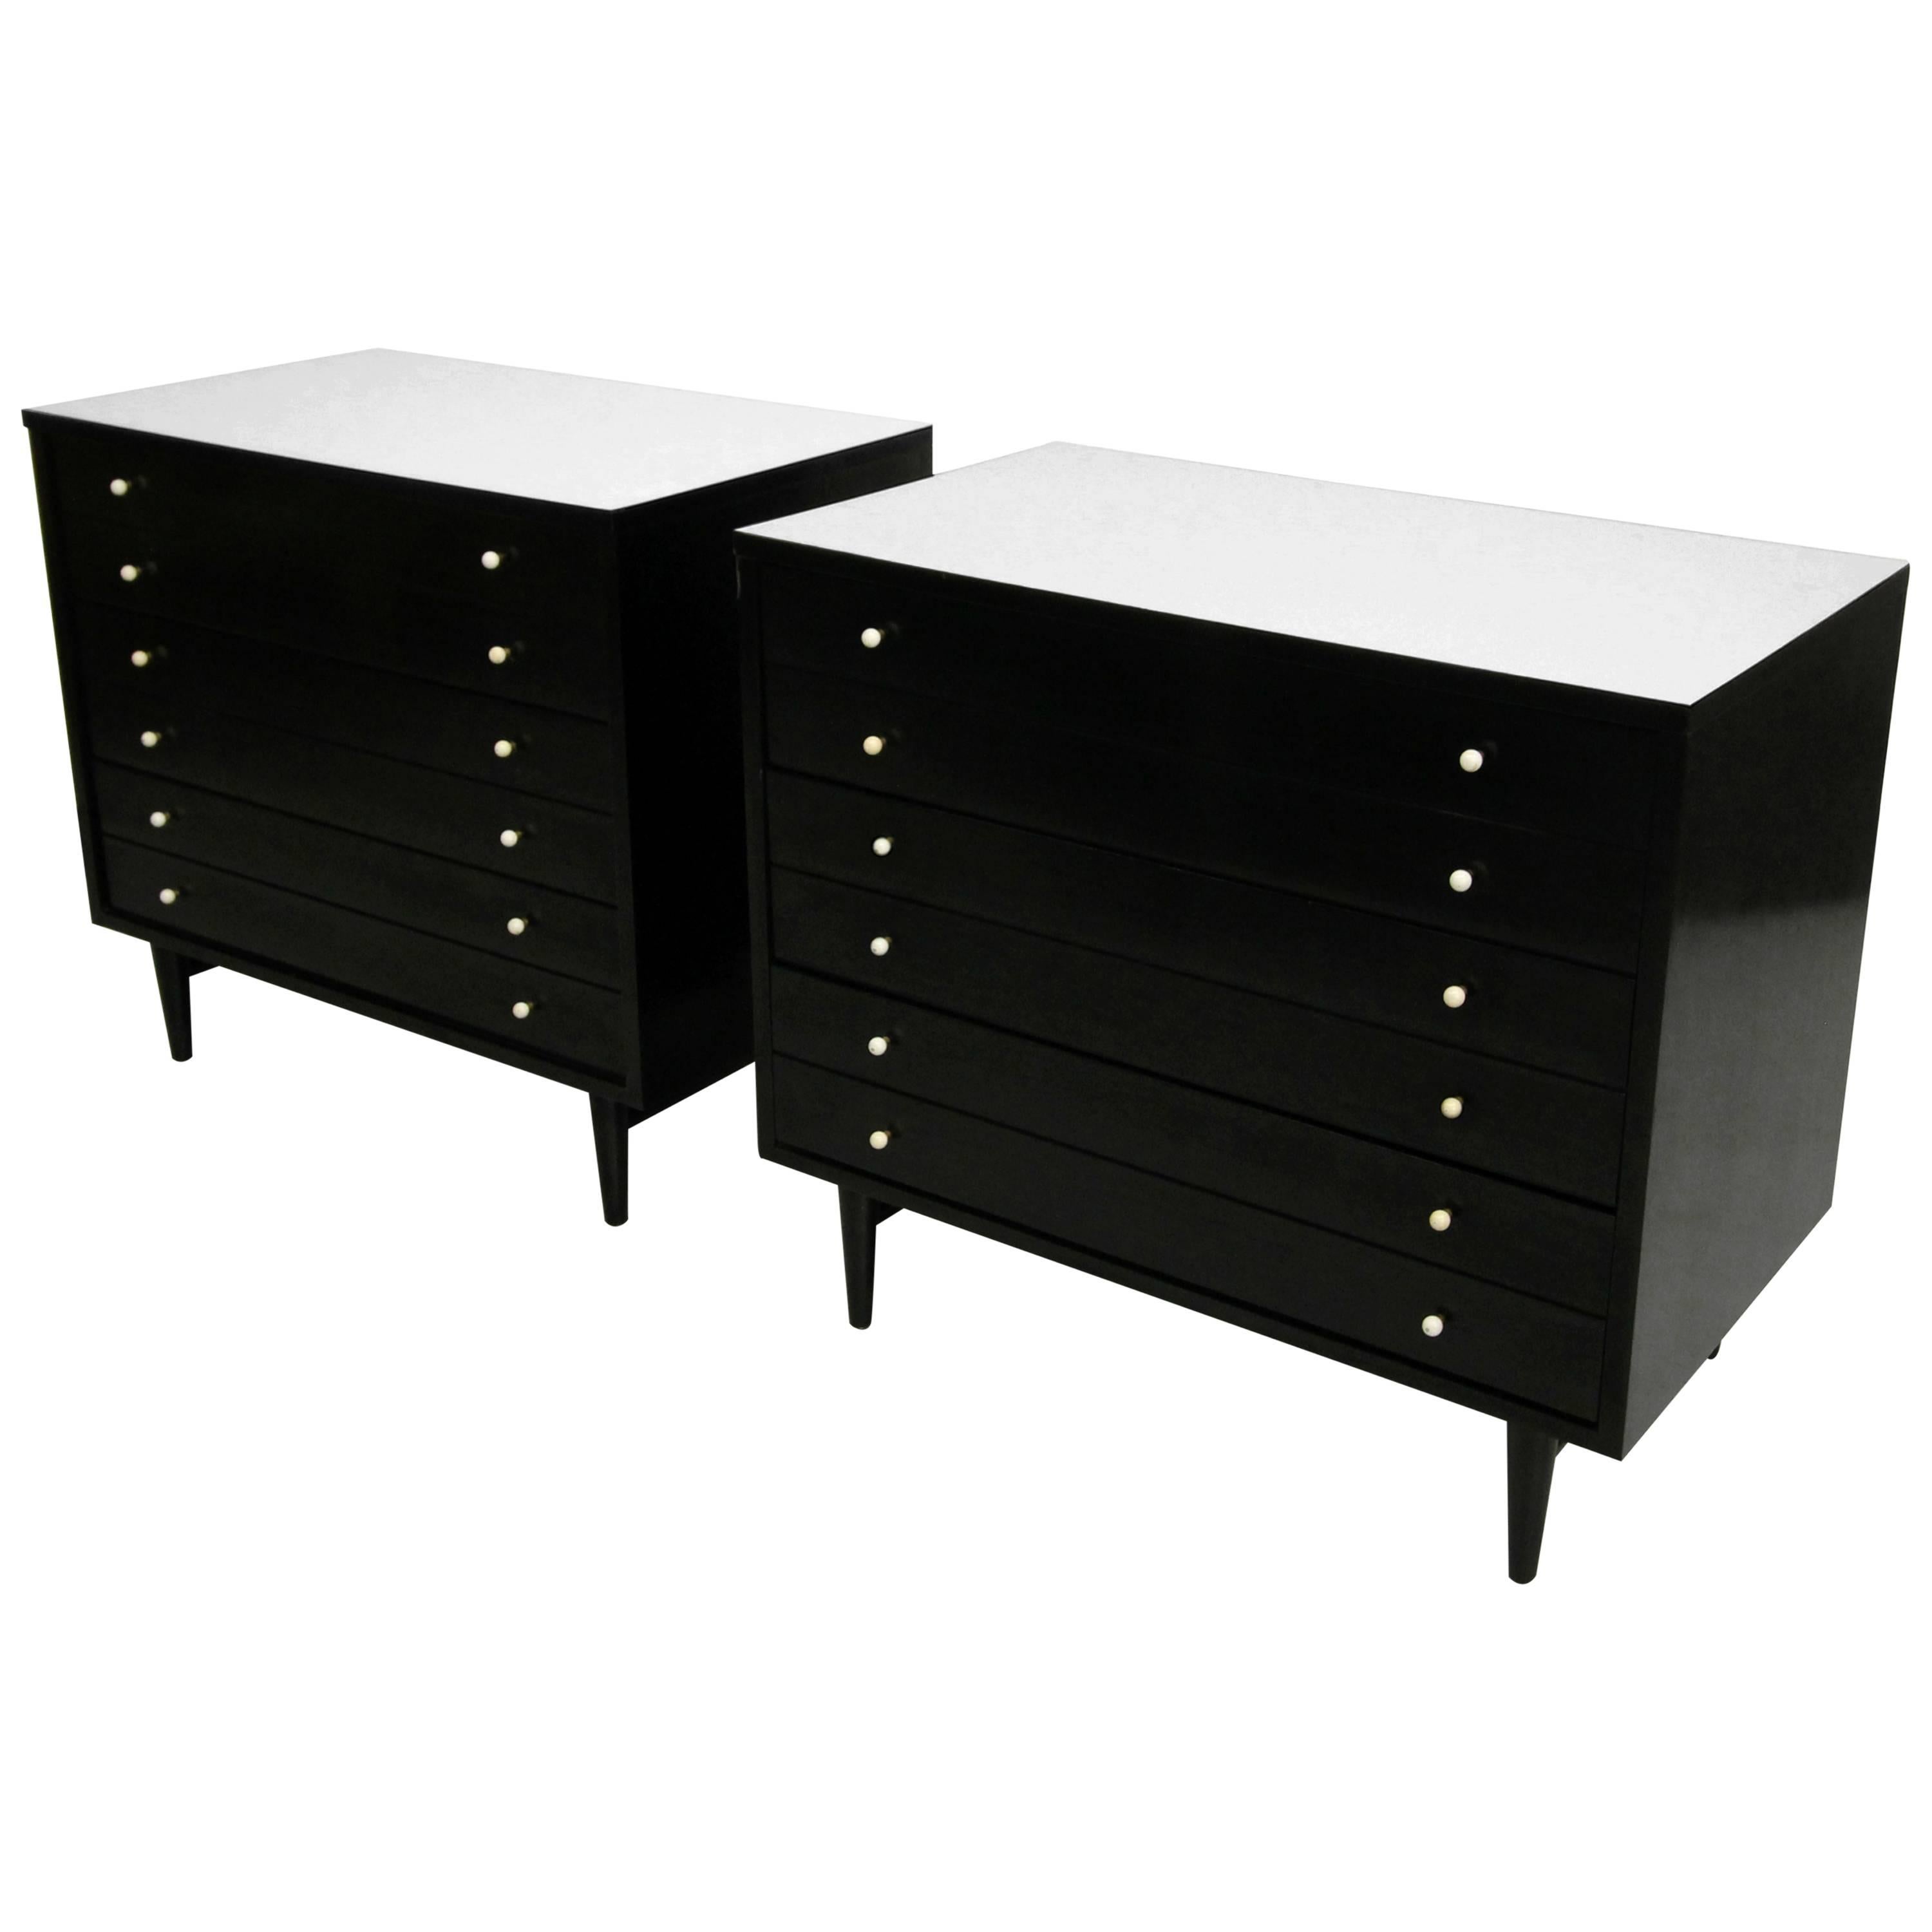 Pair of Matched Black and White Mid-Century Dressers